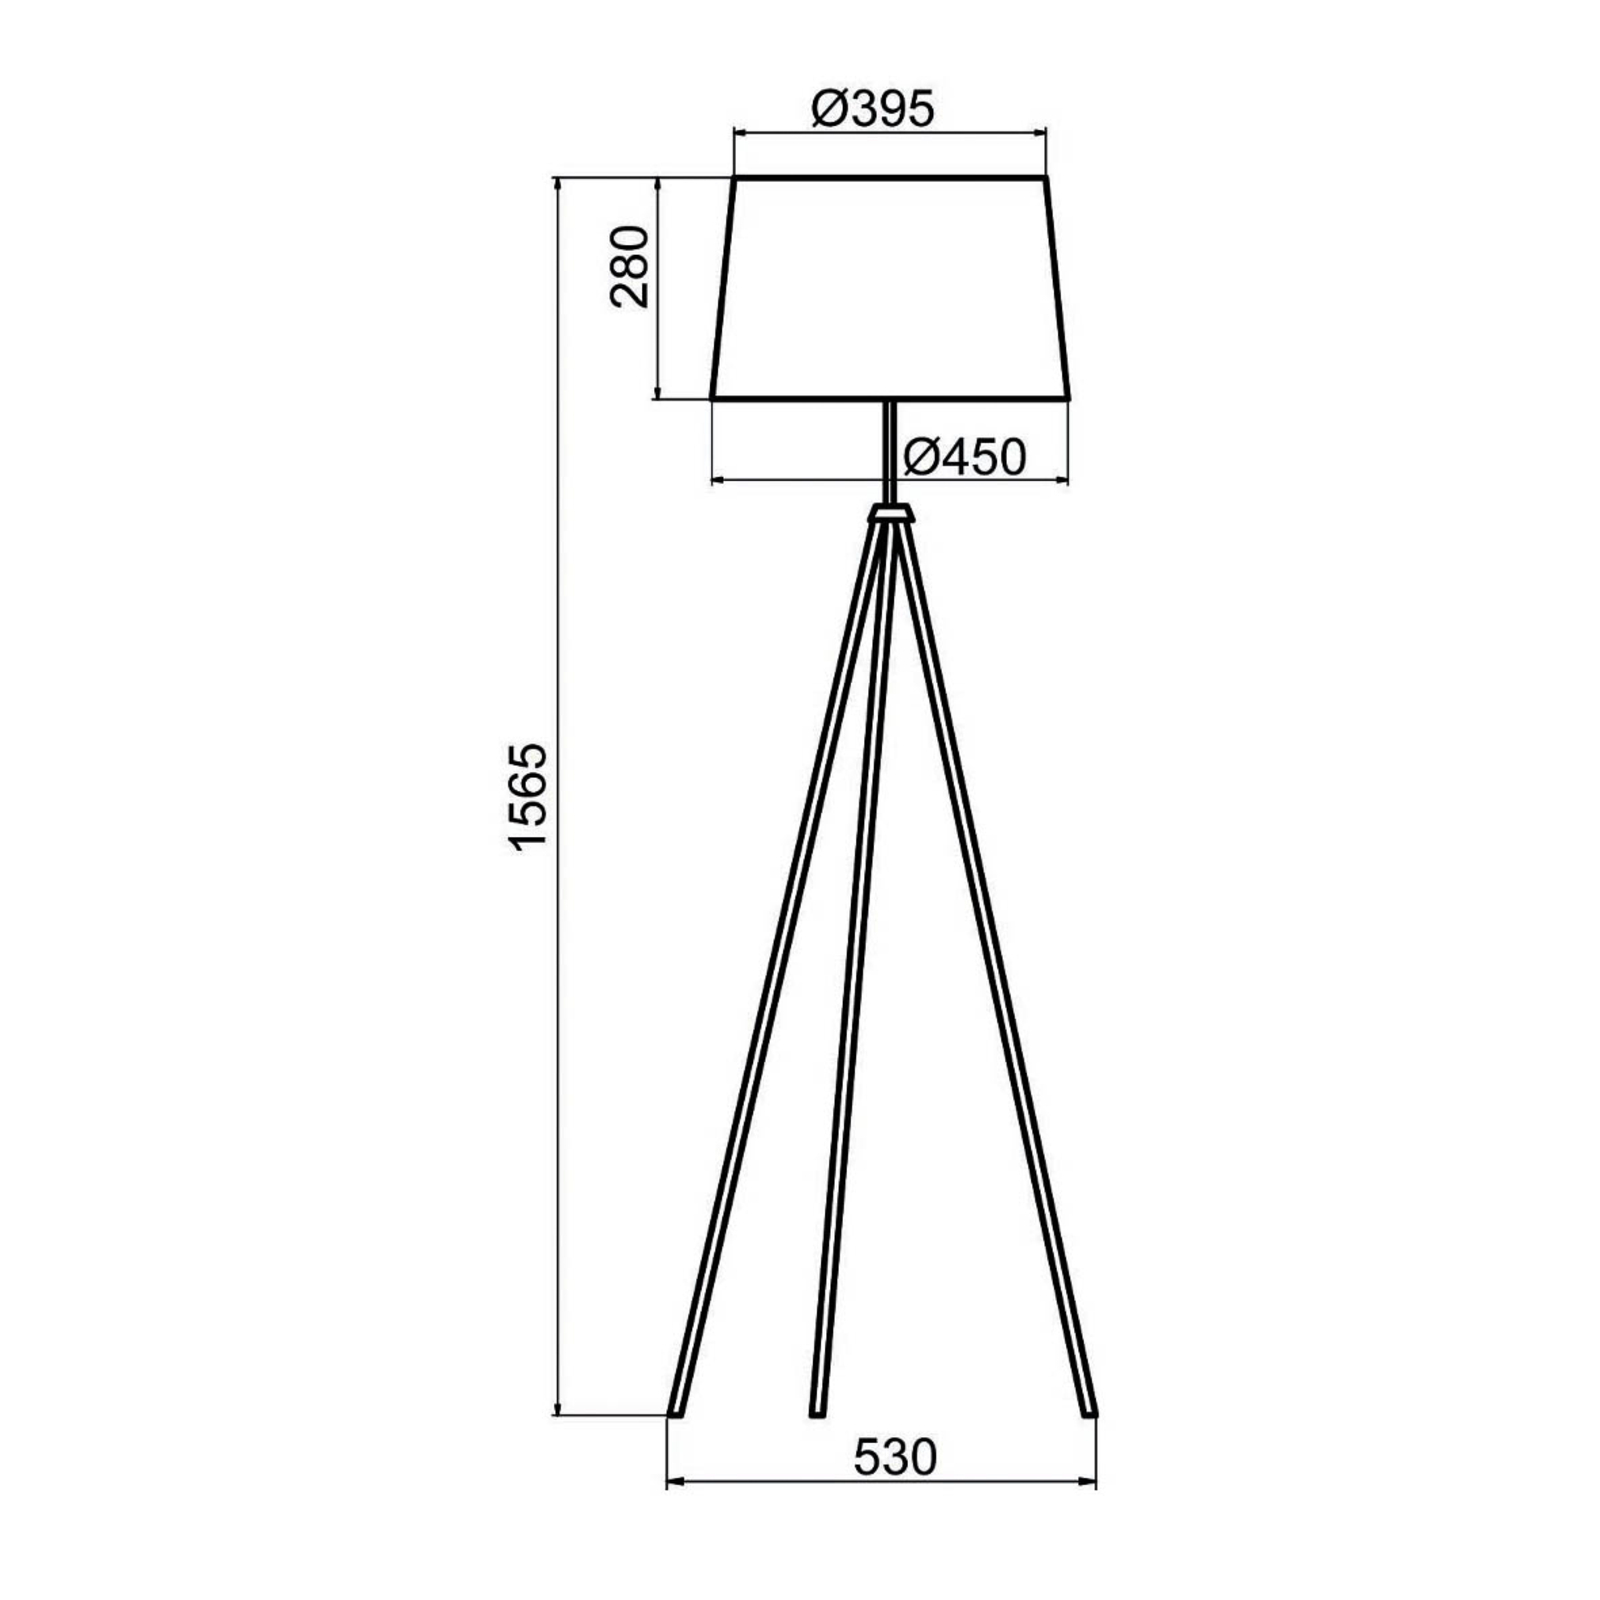 Aluminor Tropic floor lamp white, red cable